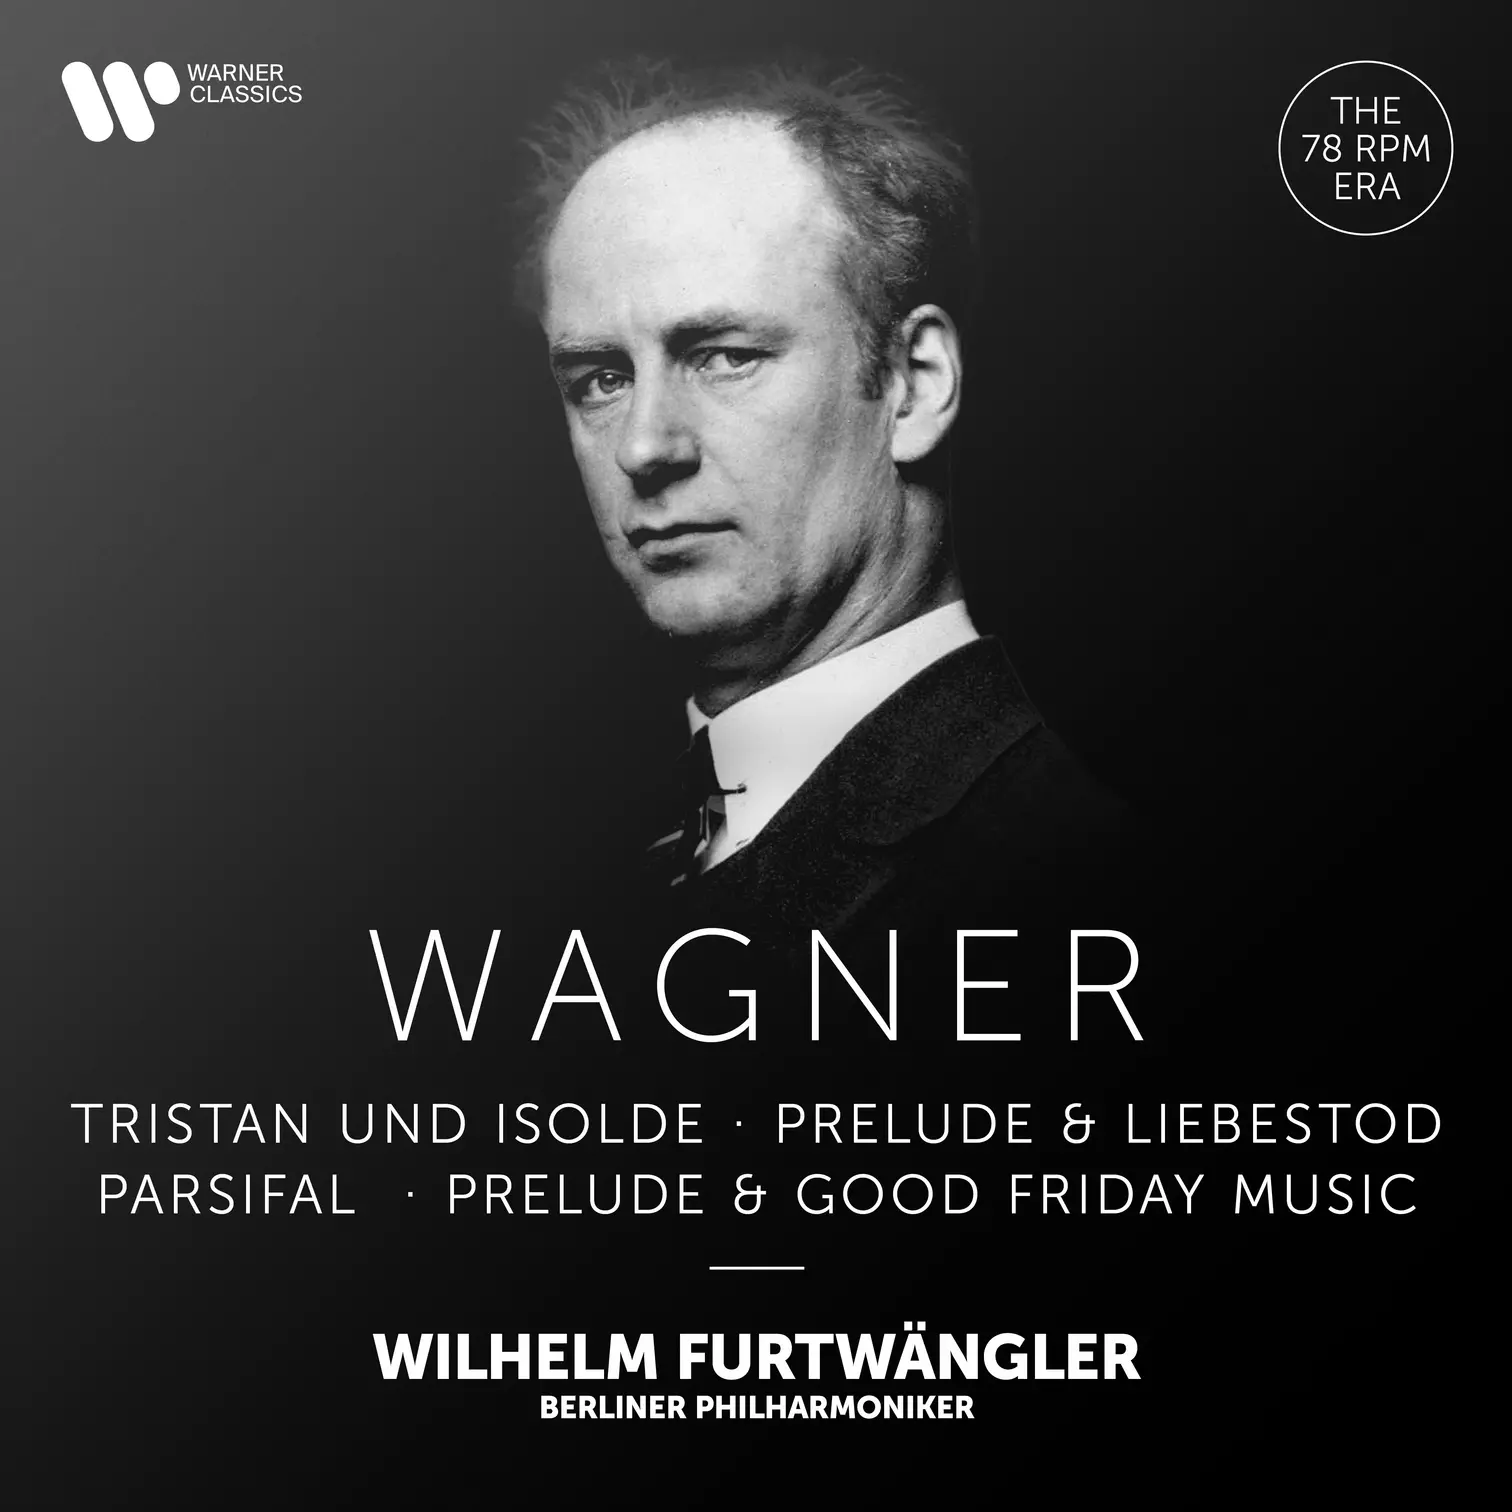 Wagner: Prelude & Liebestod from Tristan, Prelude & Good Friday Music from Parsifal